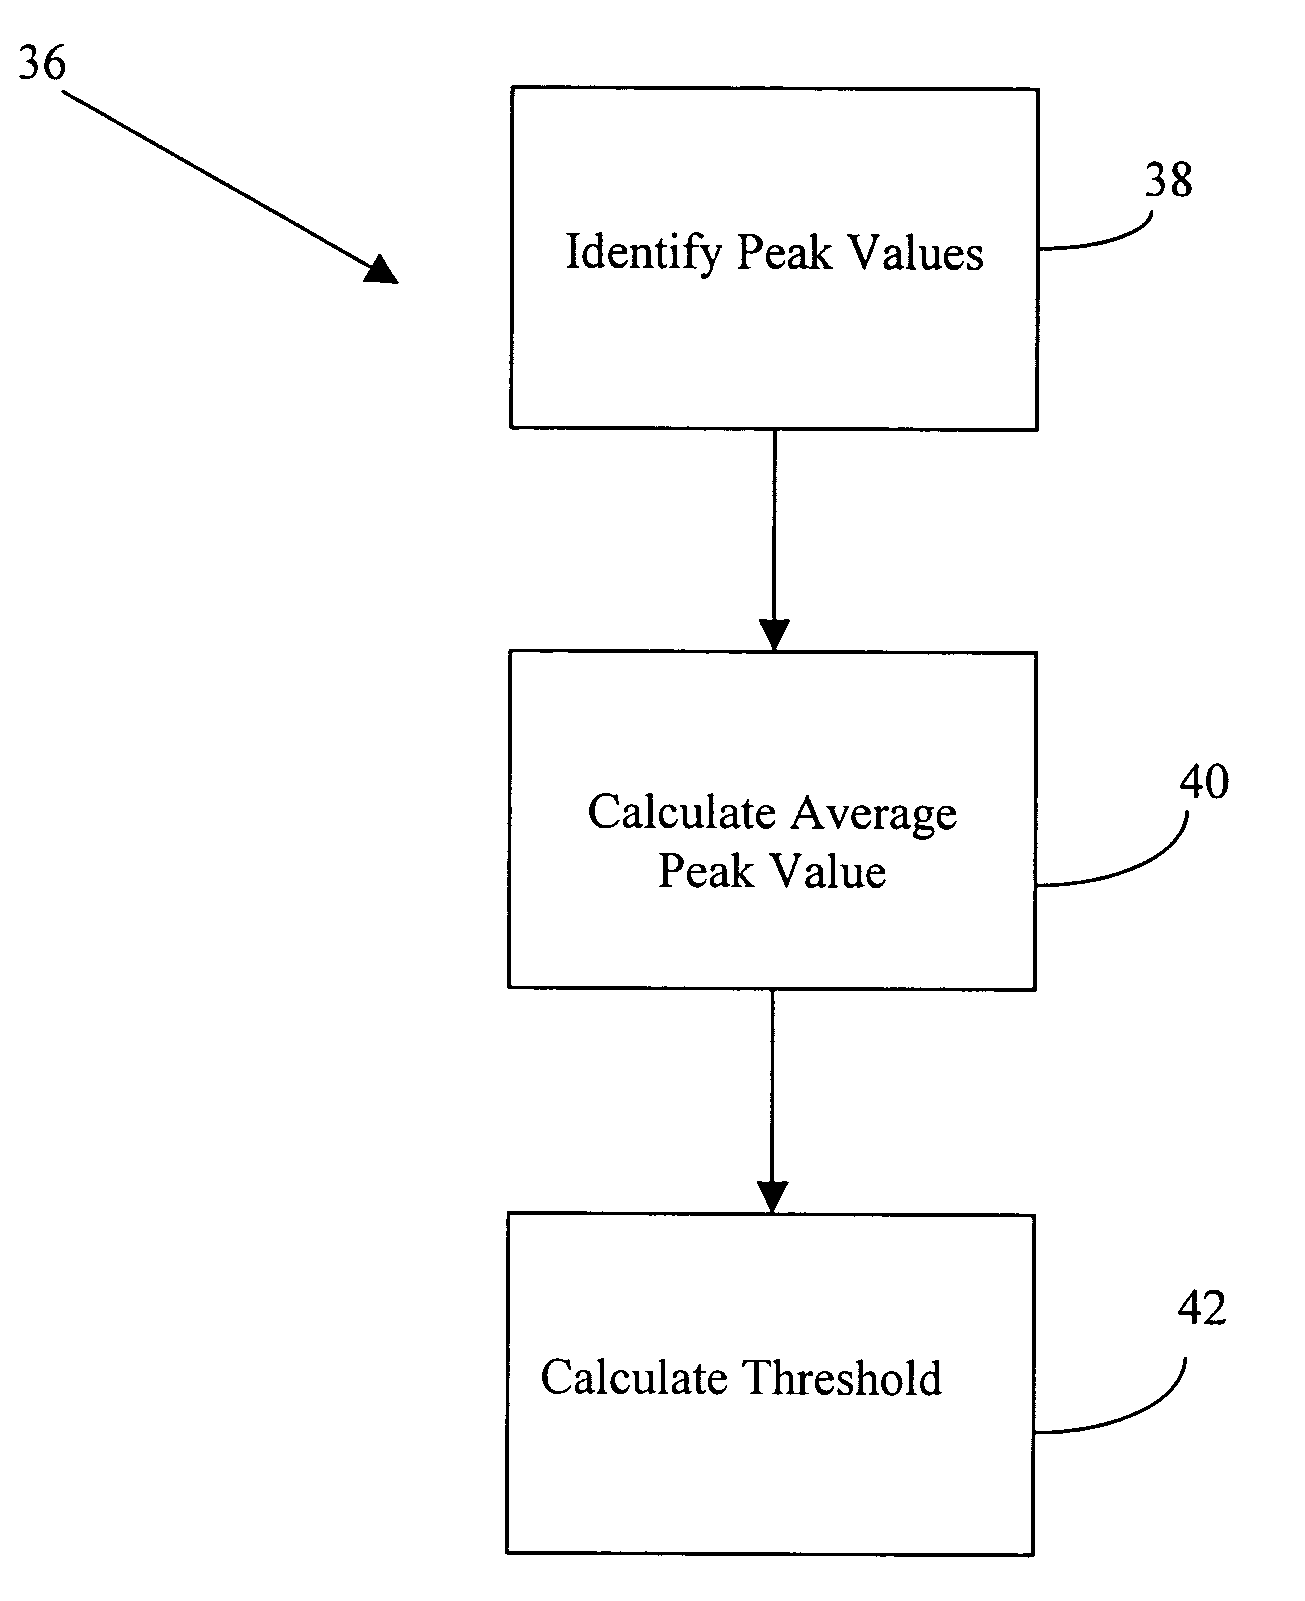 Automated threshold selection for a tractable alarm rate